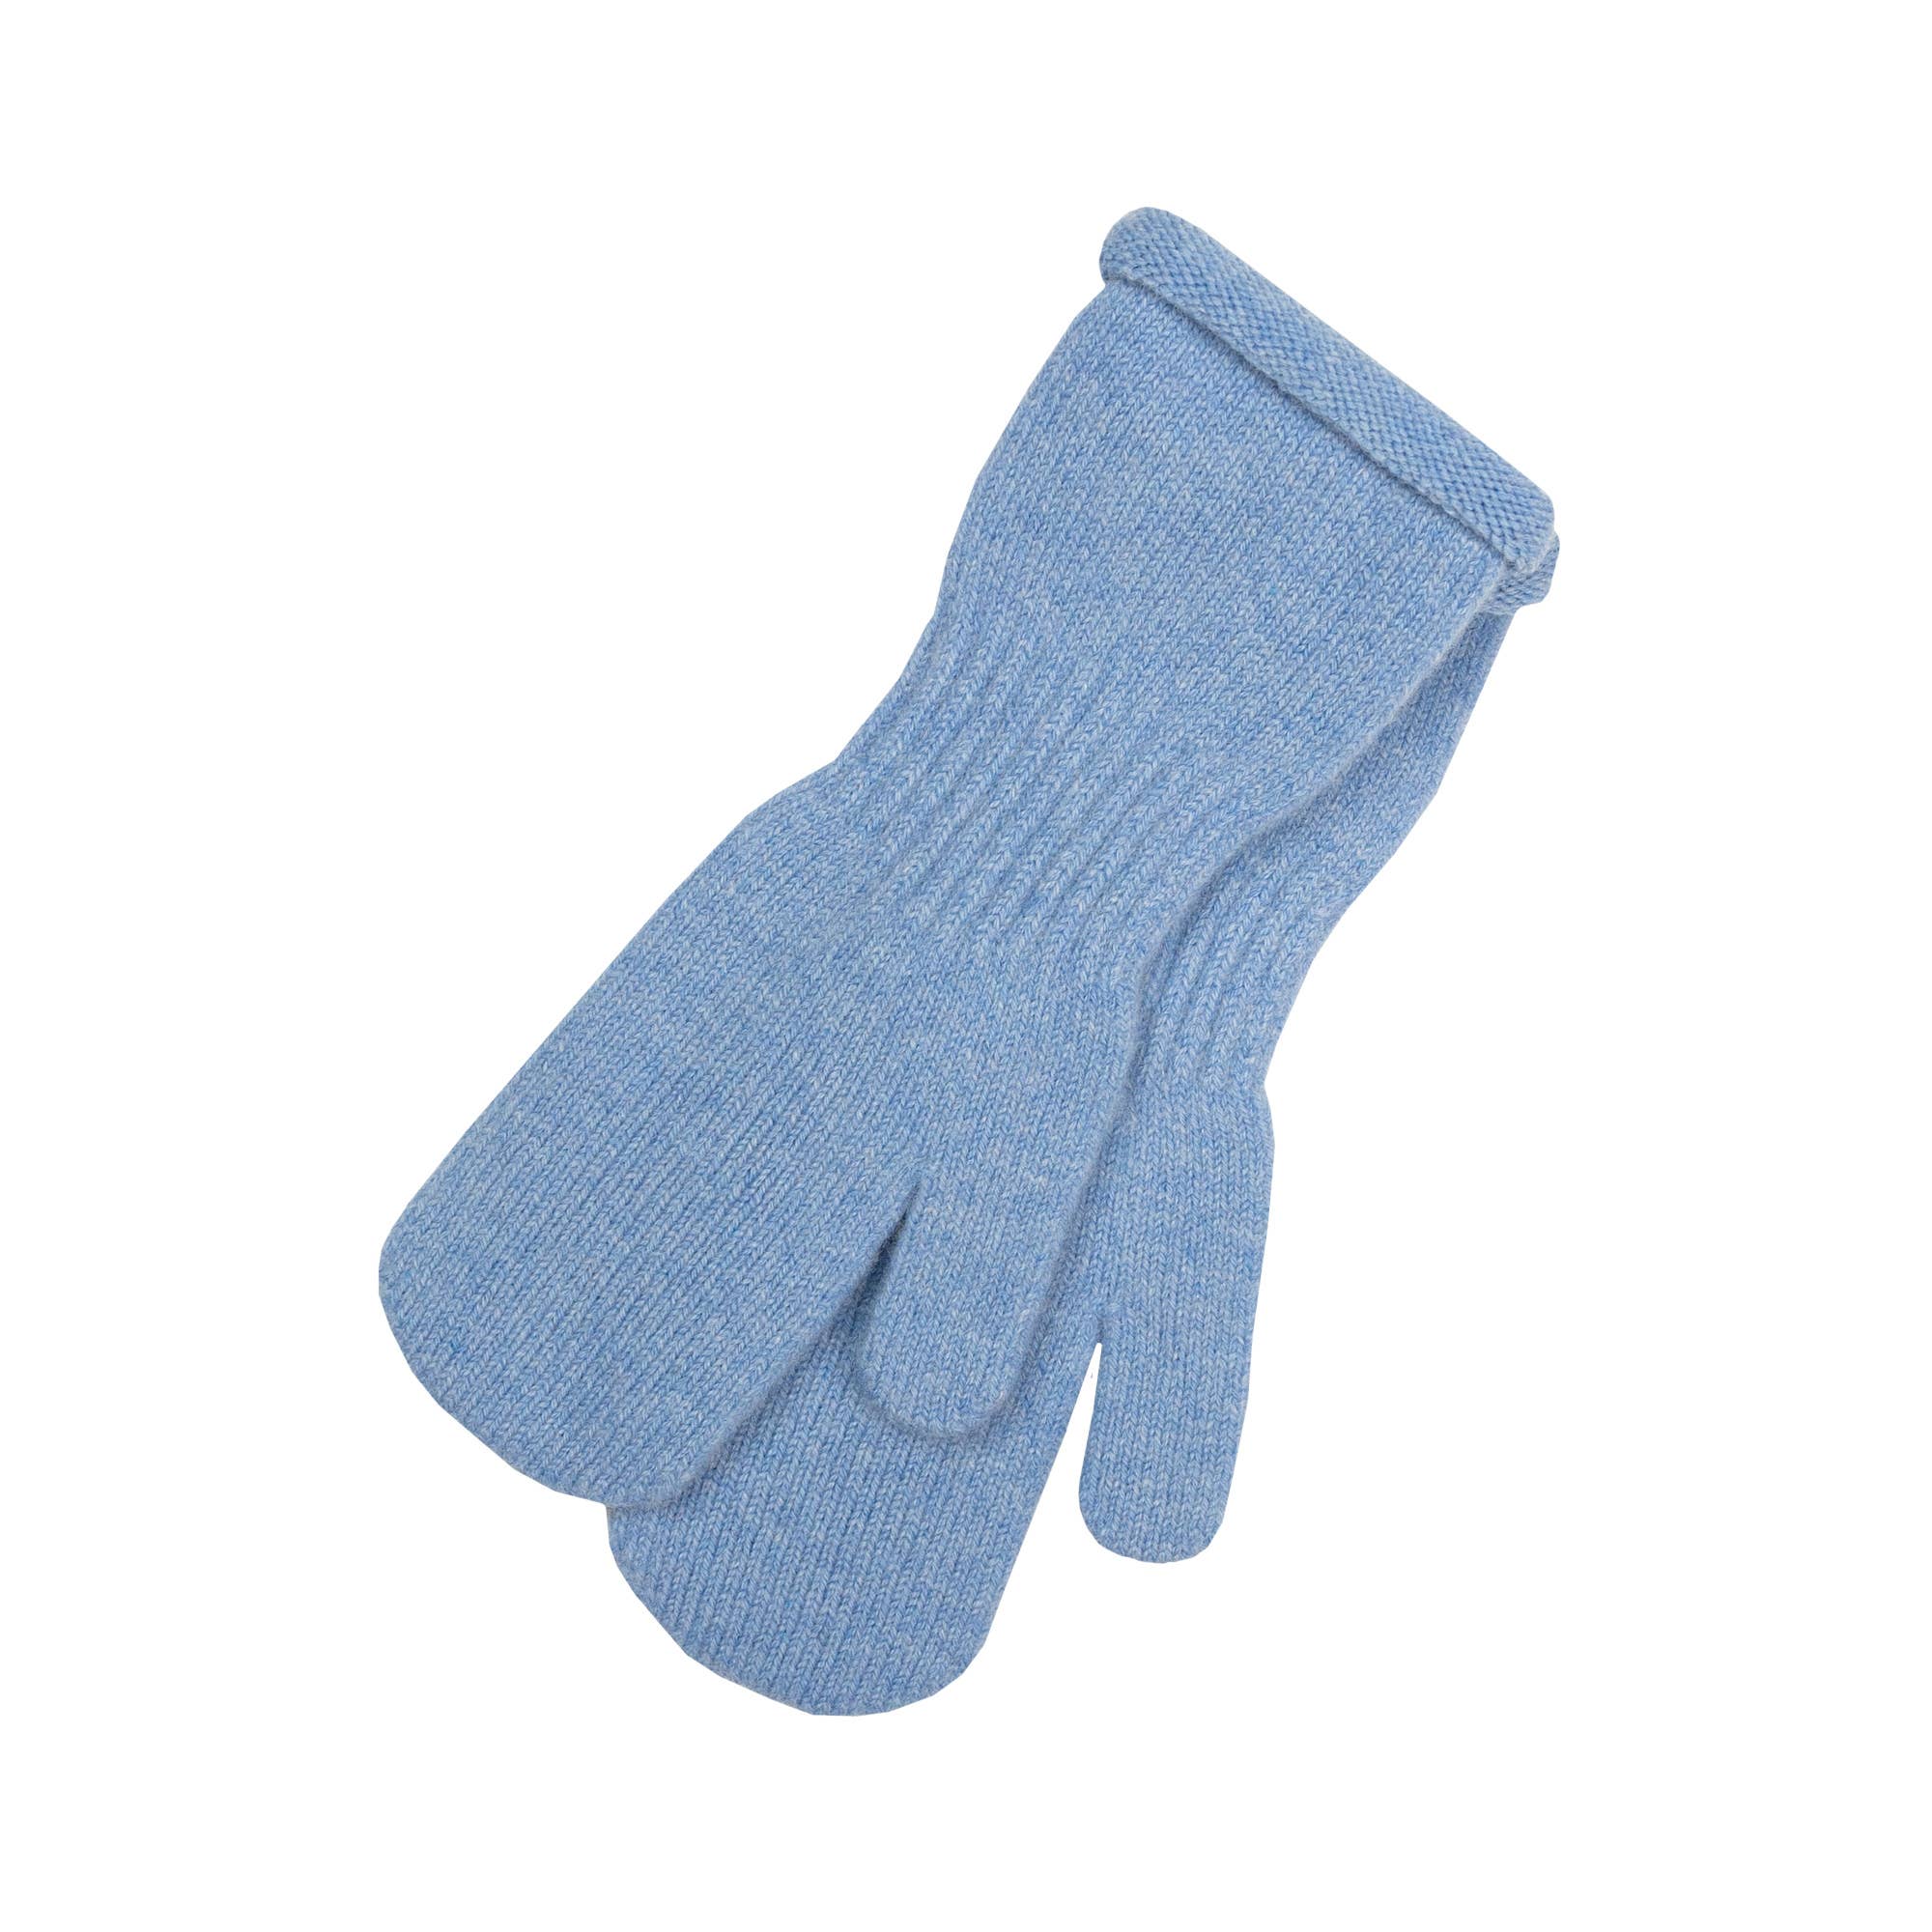 menique - Kids' Mittens Knitted Merino & Cashmere: 3-6 years / Light blue